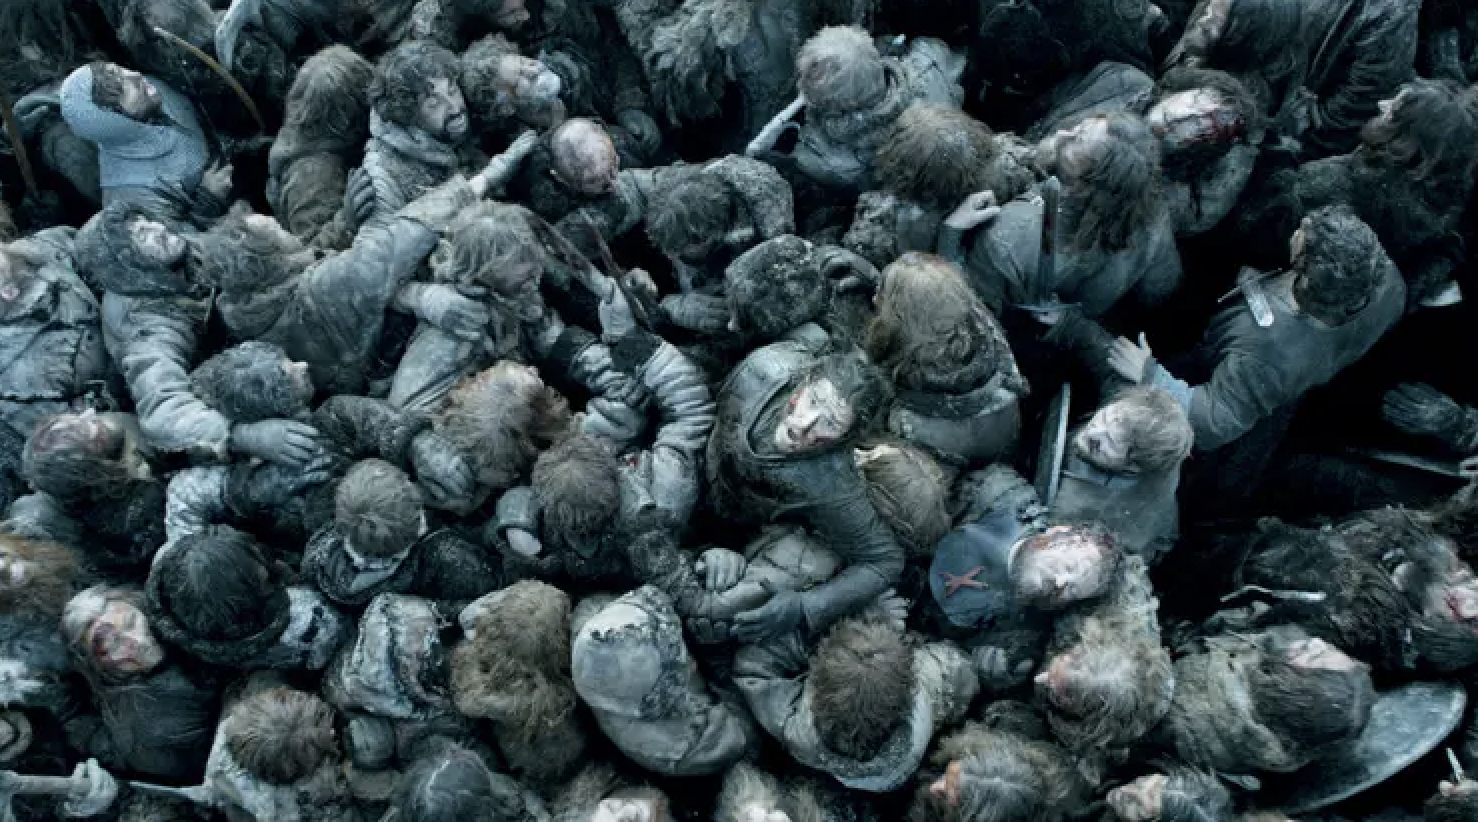 A dense crowd of characters from the show &quot;Game of Thrones&quot; engaged in a battle scene